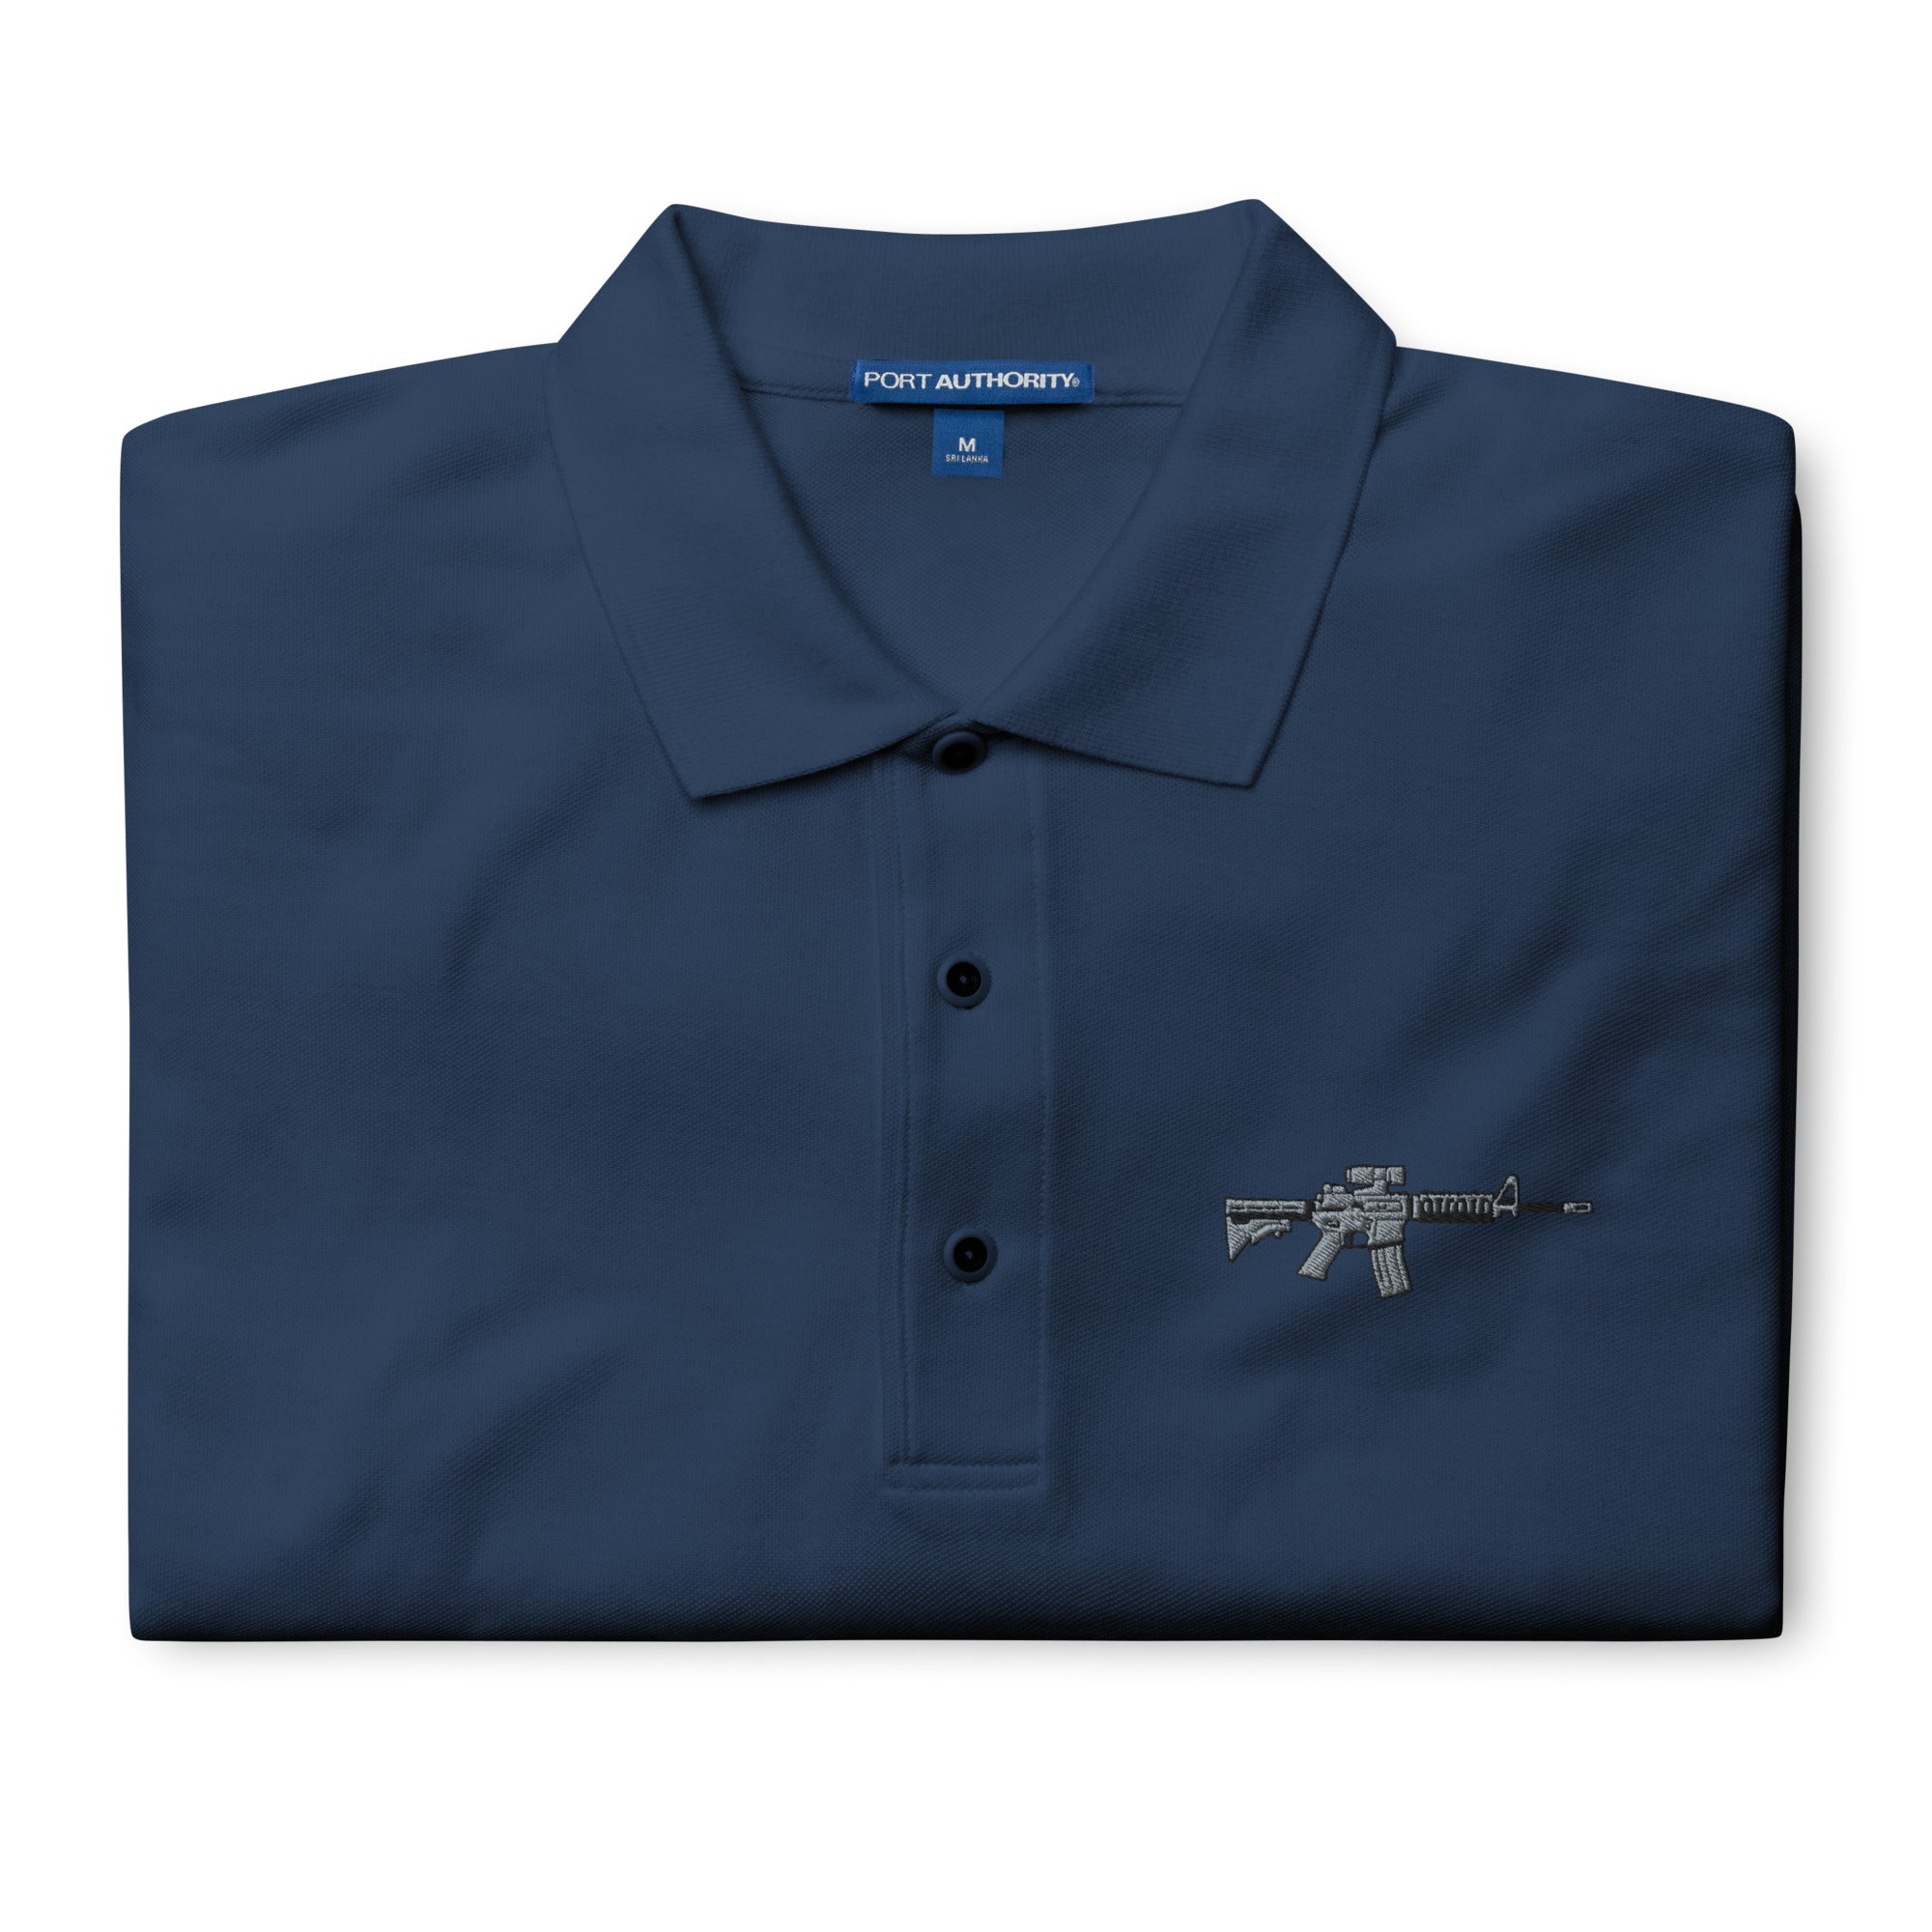 AR-15 Embroidered Men's Polo